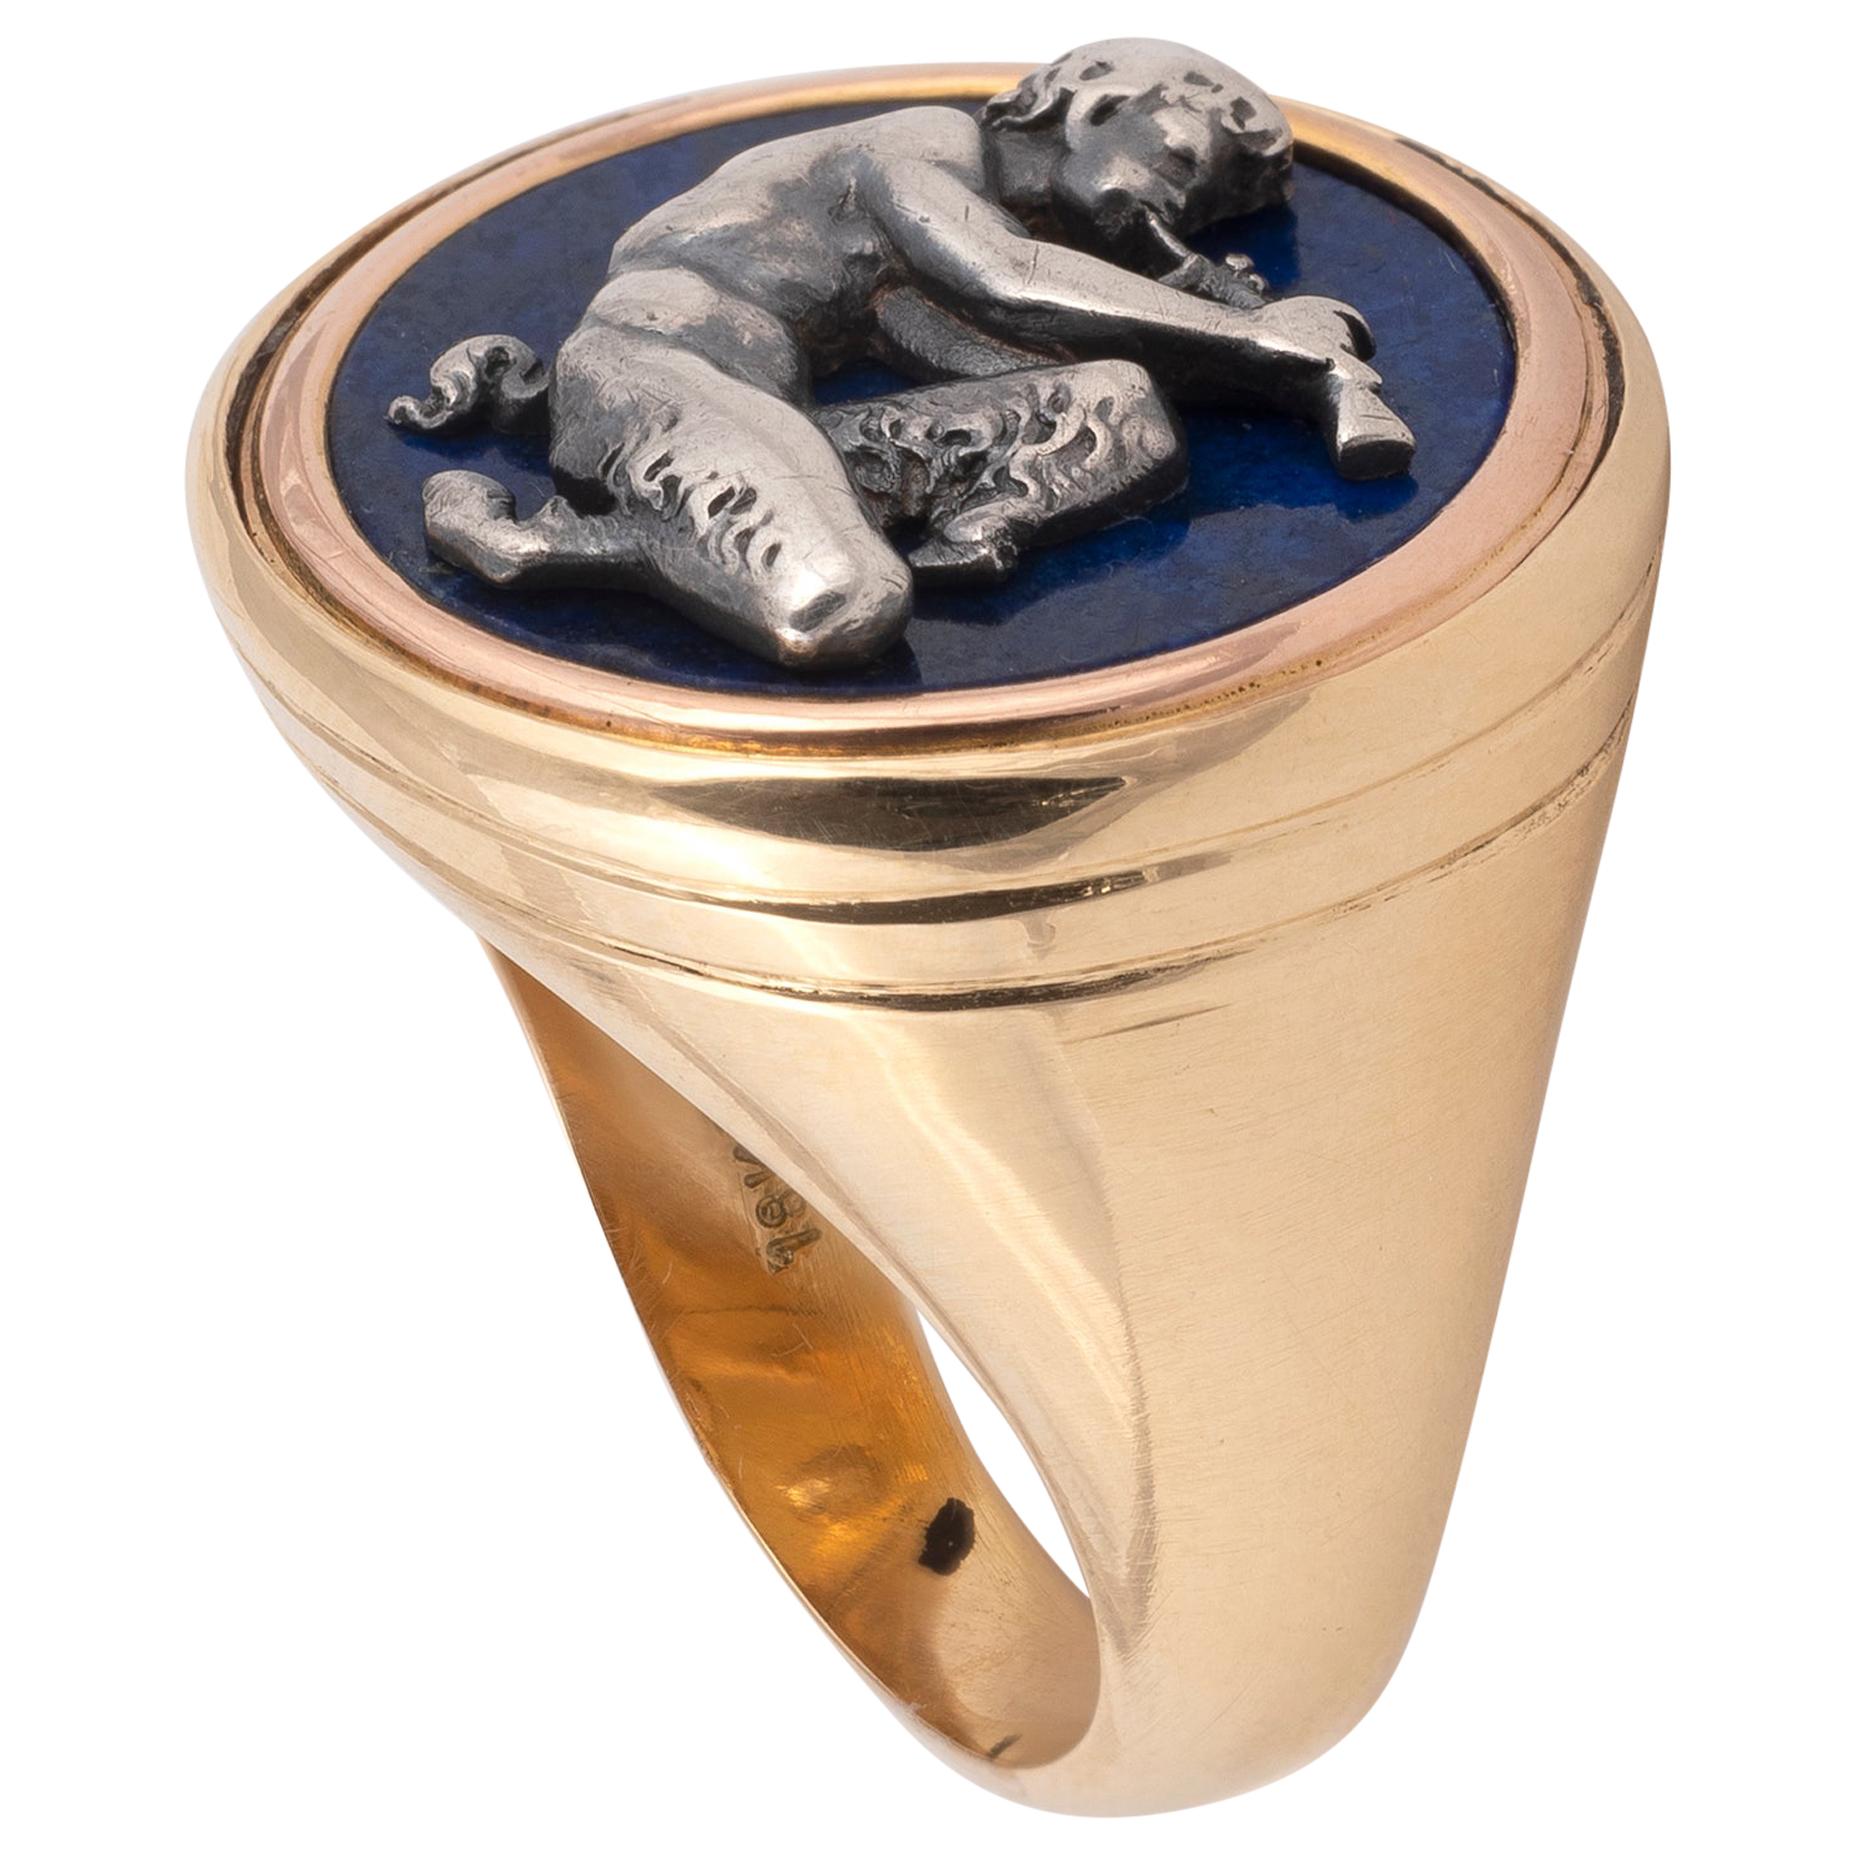 Depicting Pan playing the pipes in silver on lapis lazuli, within gold border, 2.1cm wide
Size : 7
The Maison was founded in 1839 by François-Auguste Fannière and François-Joseph-Louis Fannière. they were draftsmen, sculptors, scissors and